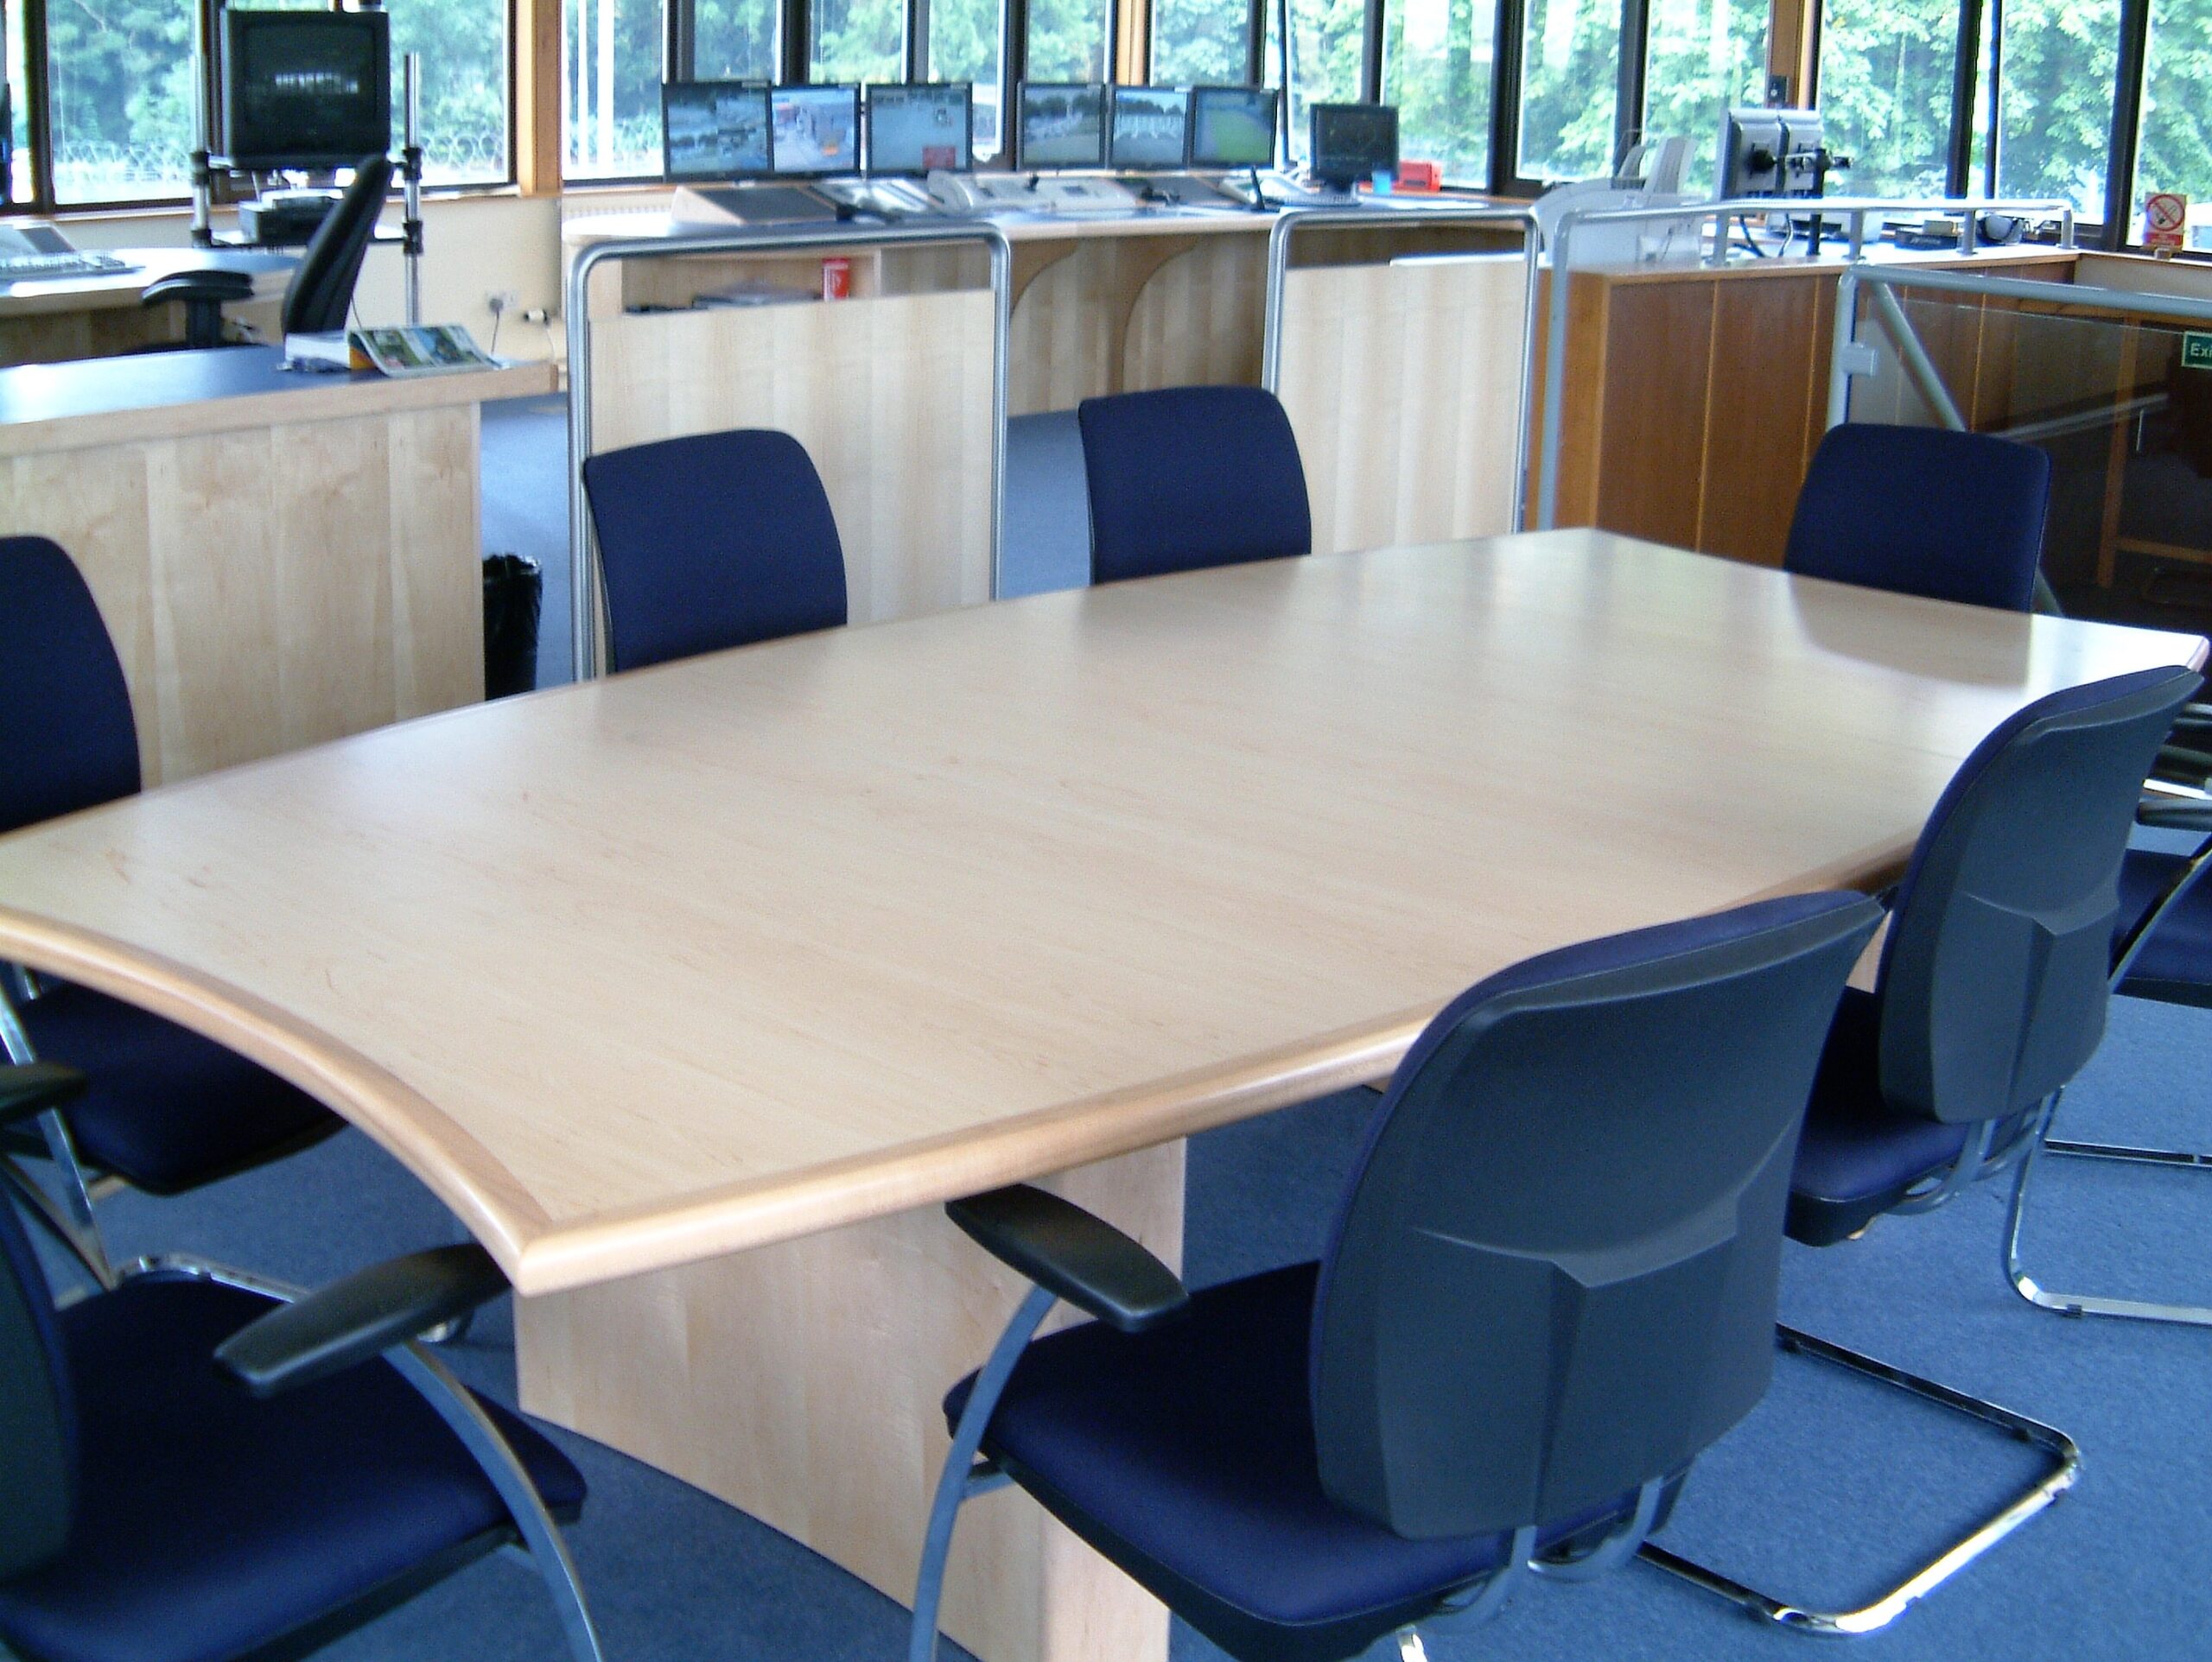 maple boardroom table with chairs inside office